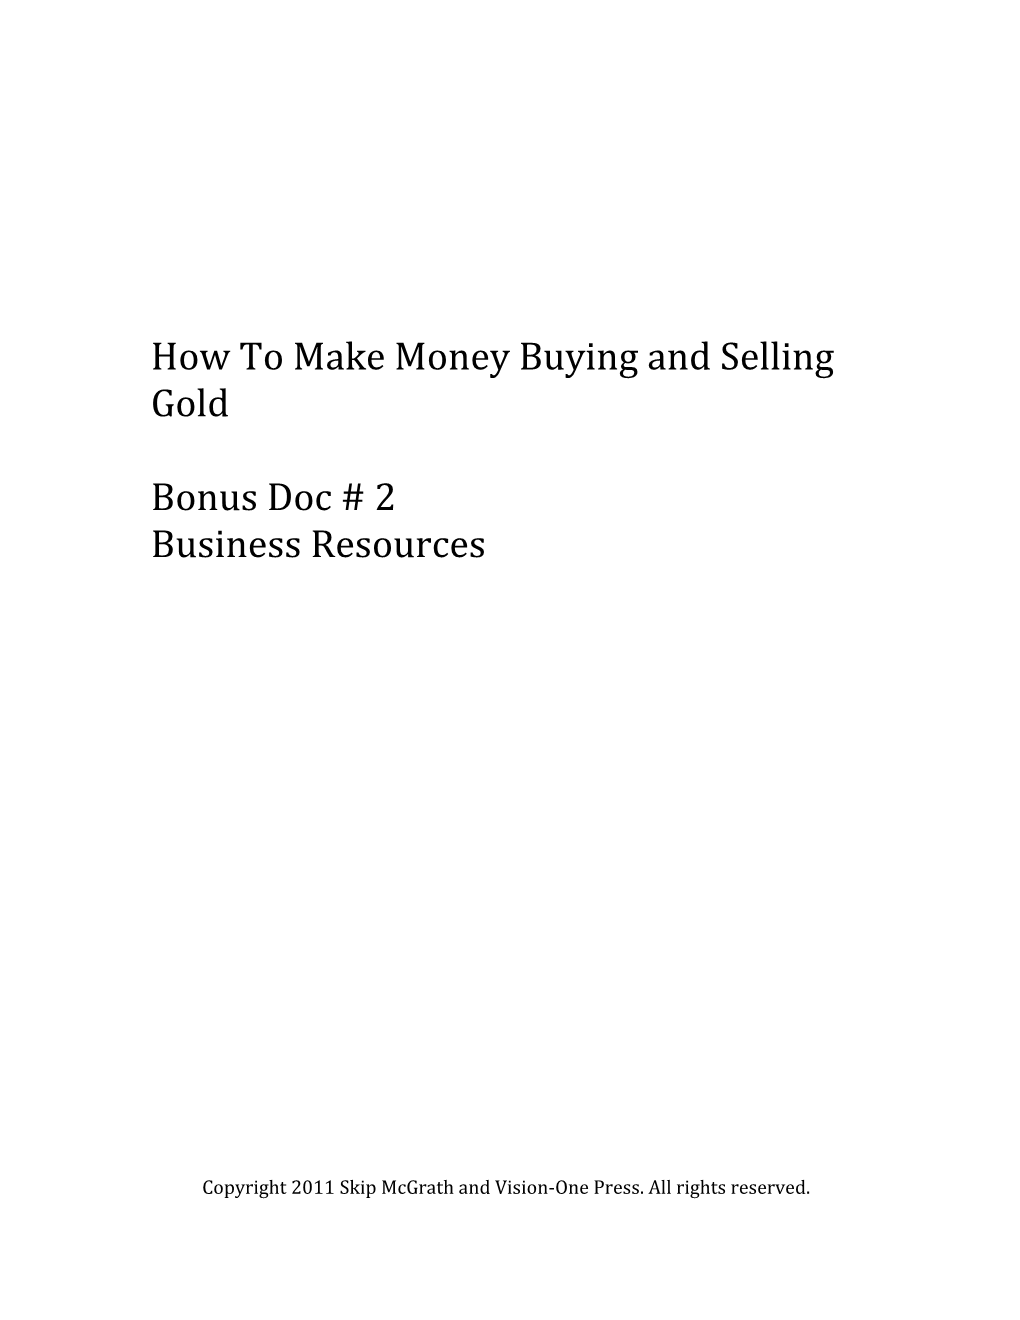 How to Make Money Buying and Selling Gold